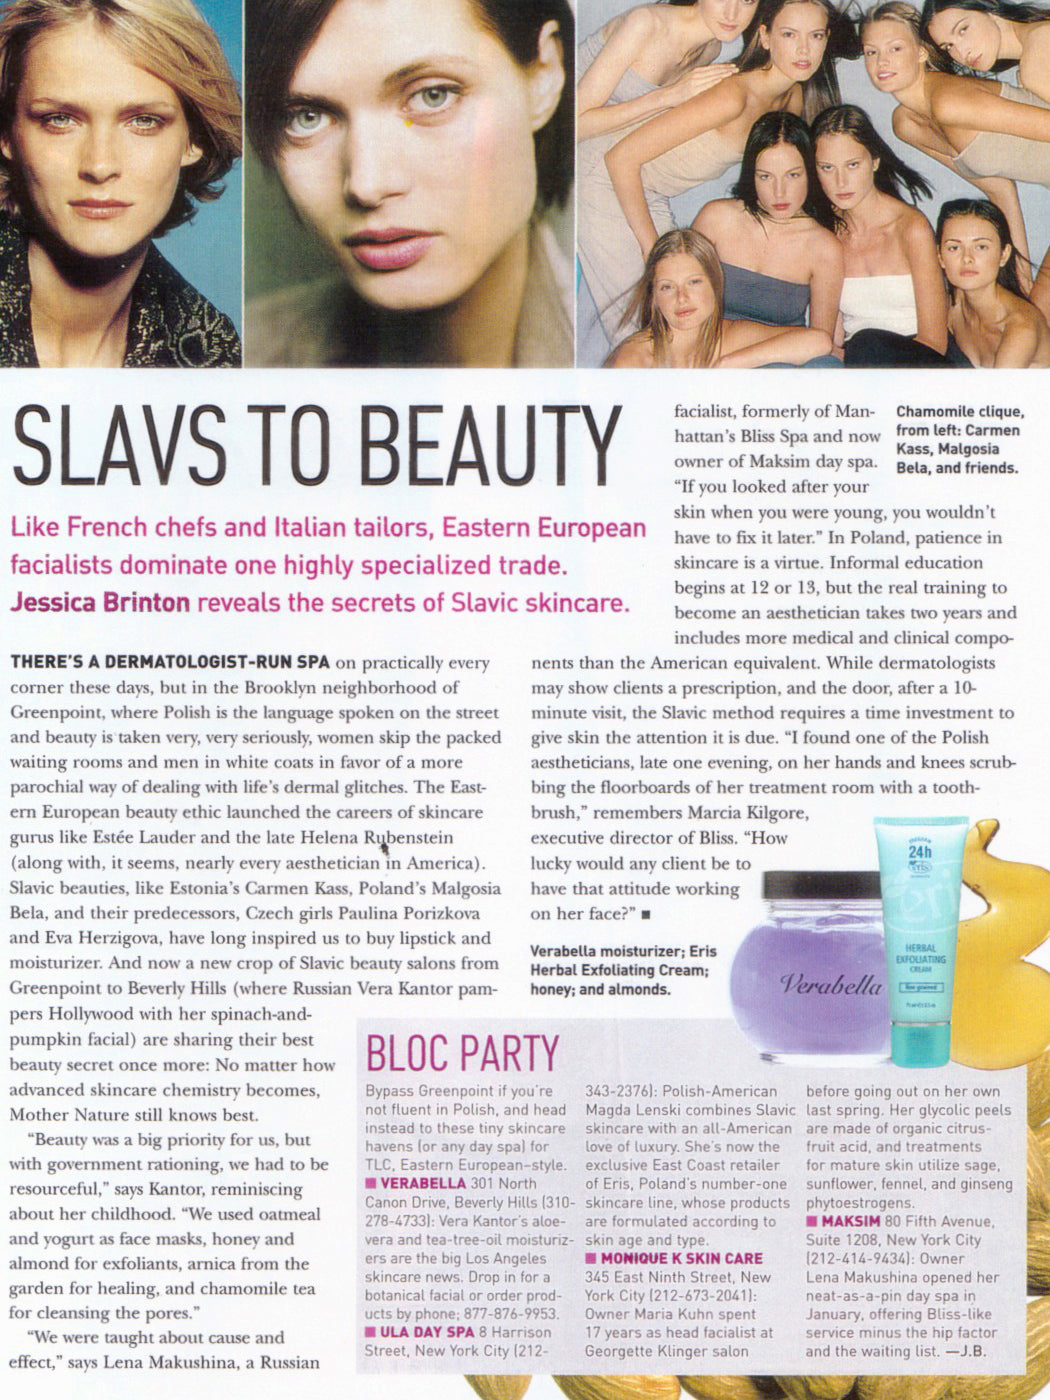 Slavs to Beauty in Bazaar magazine, featuring Verabella - call for details